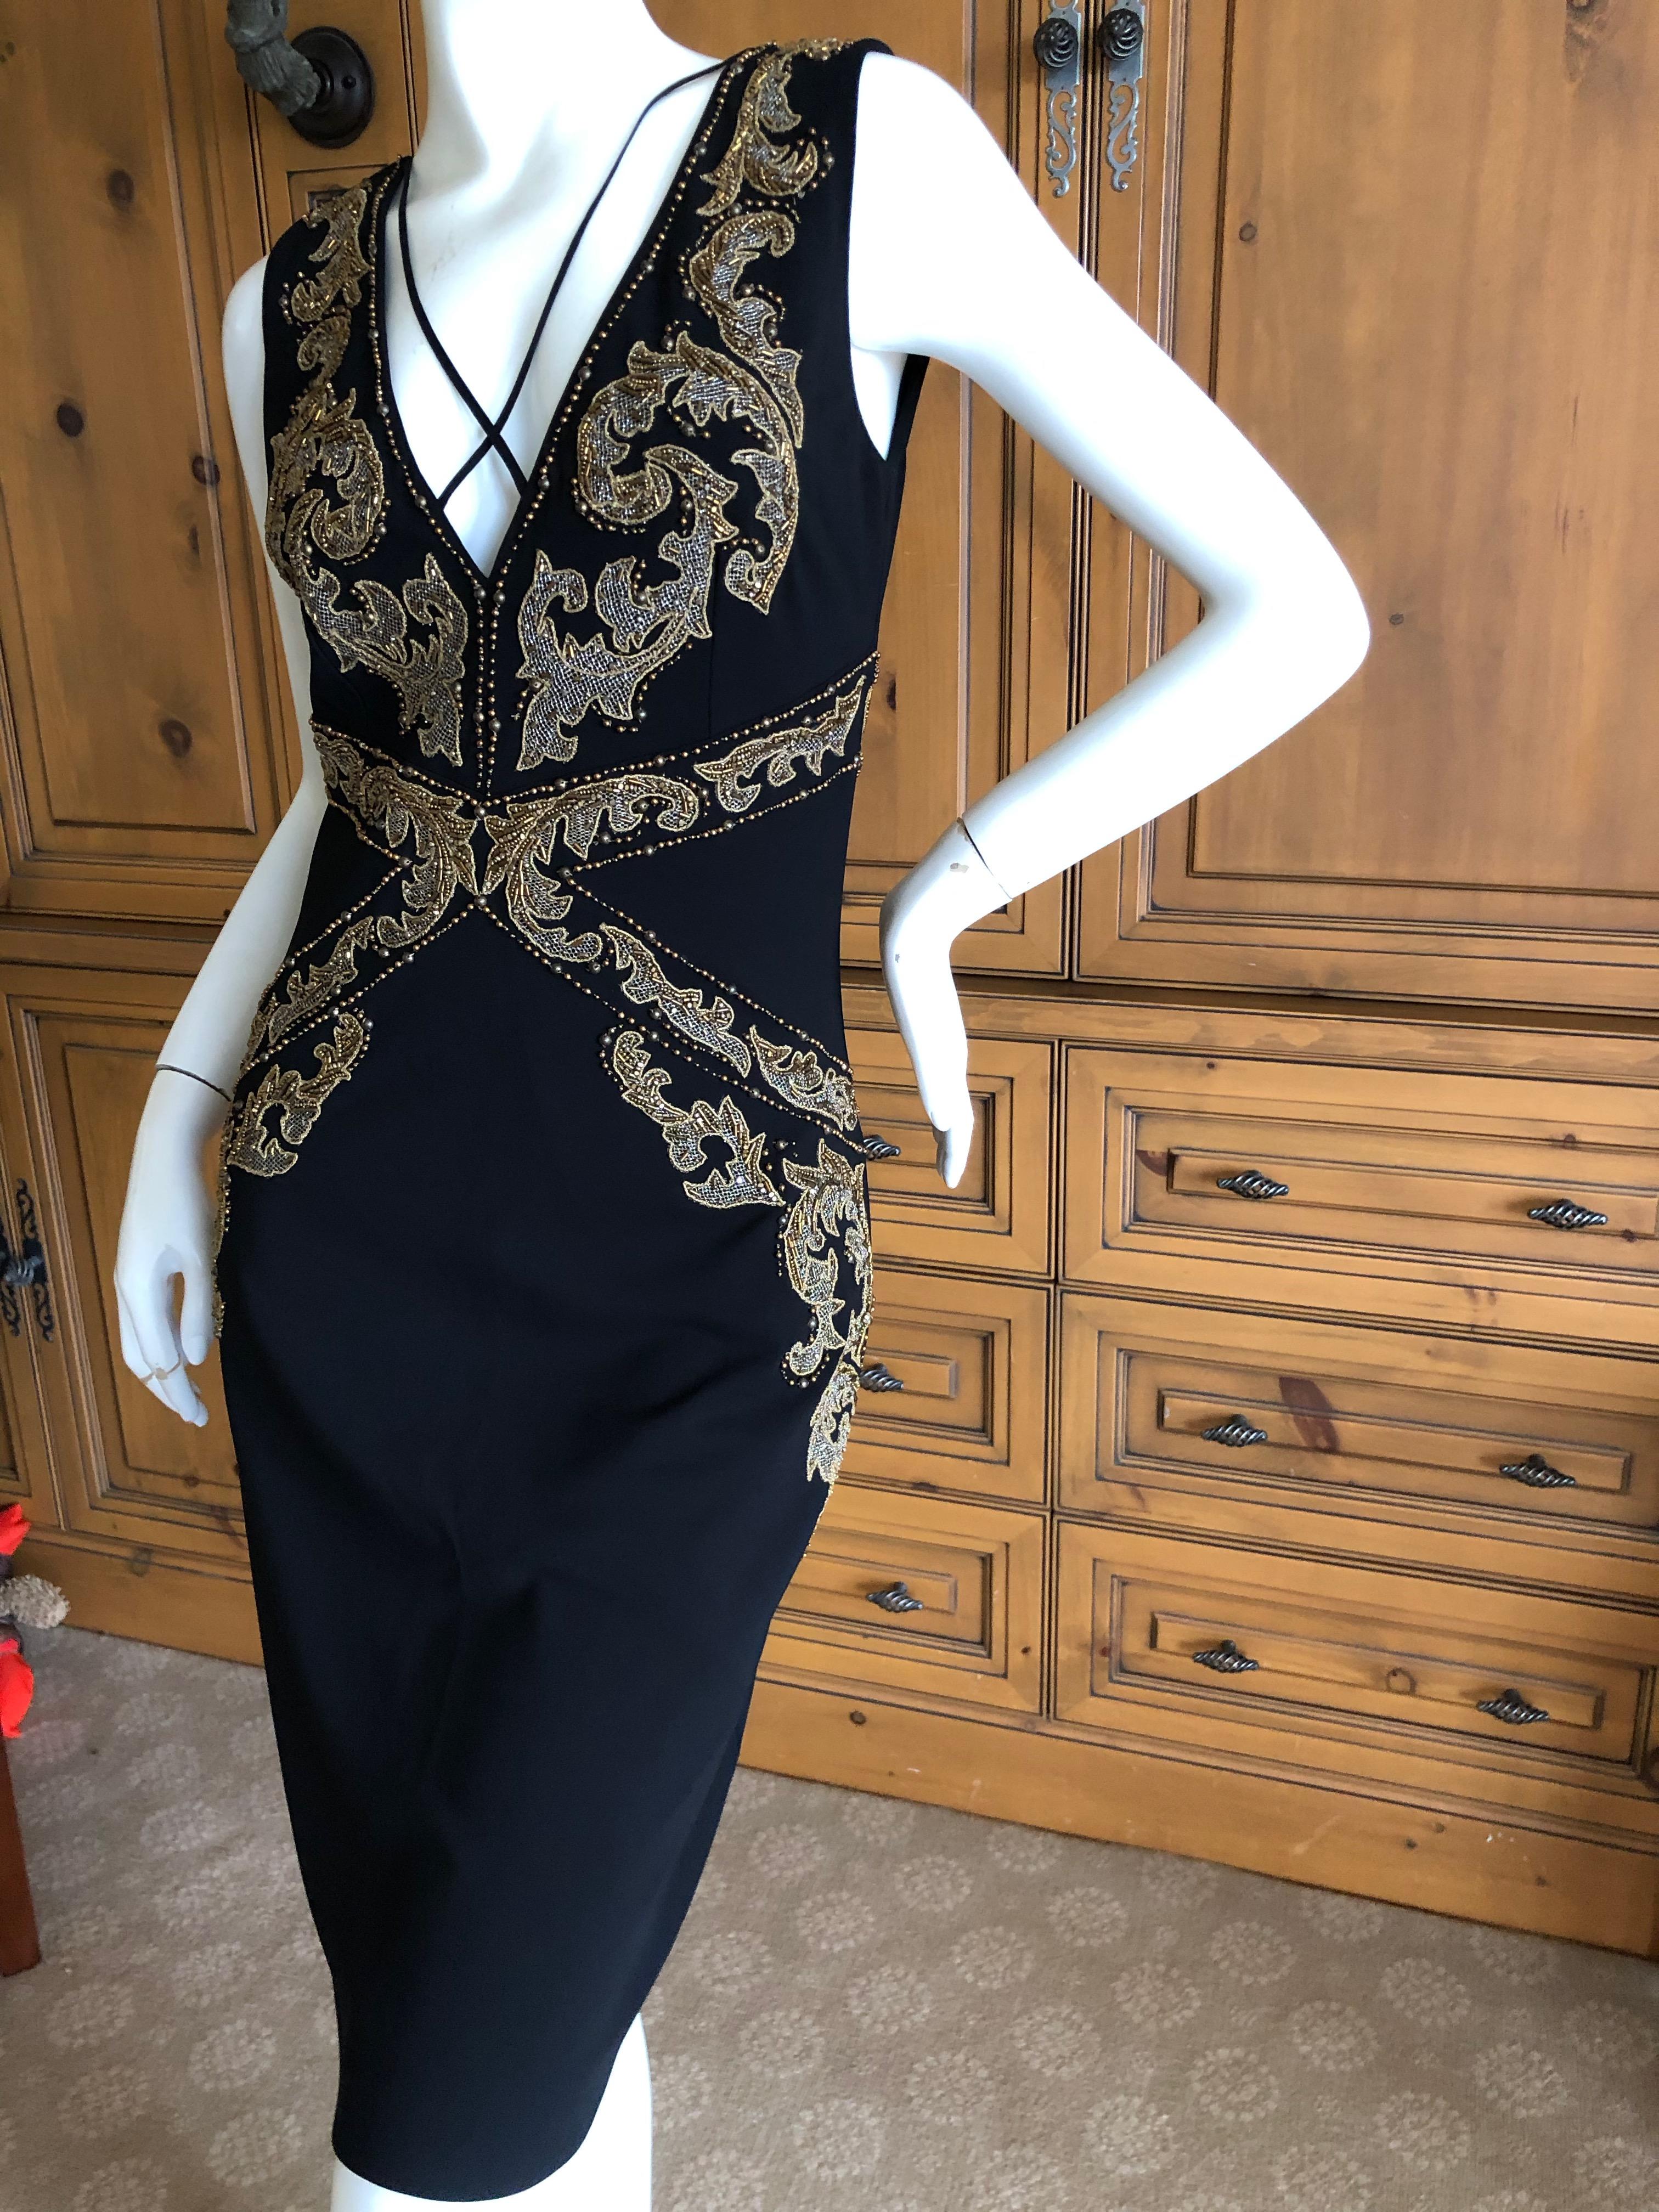 Roberto Cavalli Vintage 90's Black Baroque Pattern Embellished Cocktail Dress
Size 42
This is so pretty, please use the zoom feature to see details.
Bust 36